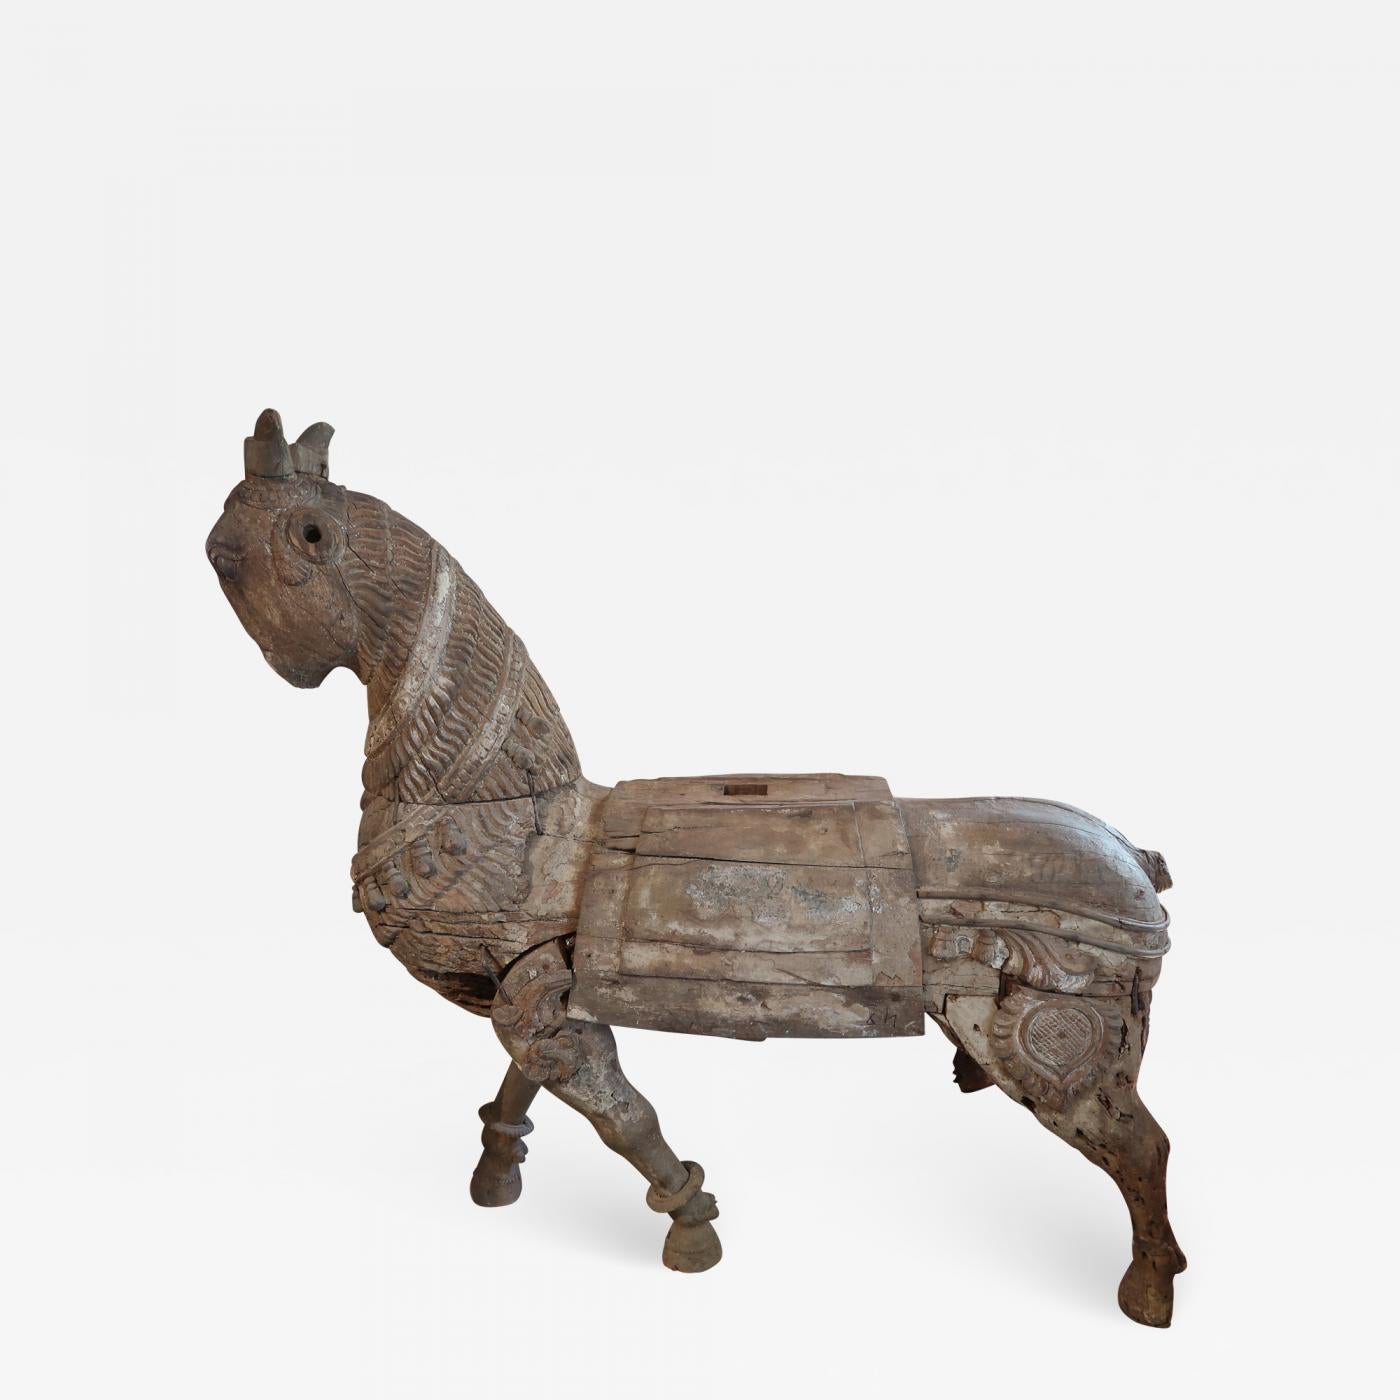 A carved wood horse, Mogol period, India 17th century. Distressed.